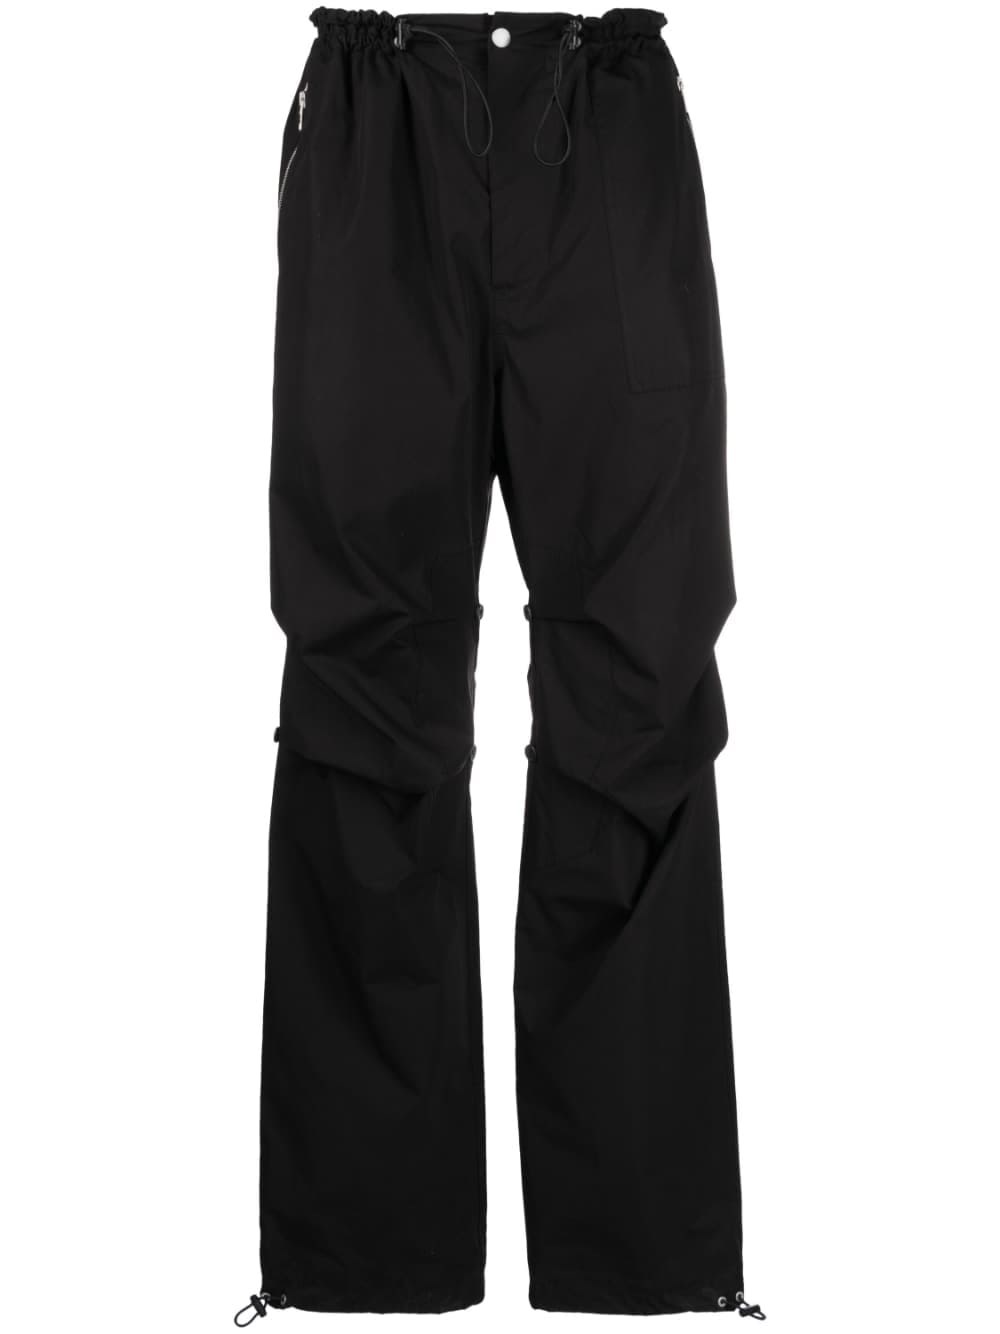 PALM ANGELS 'UPSIDEDOWN' CARGO trousers